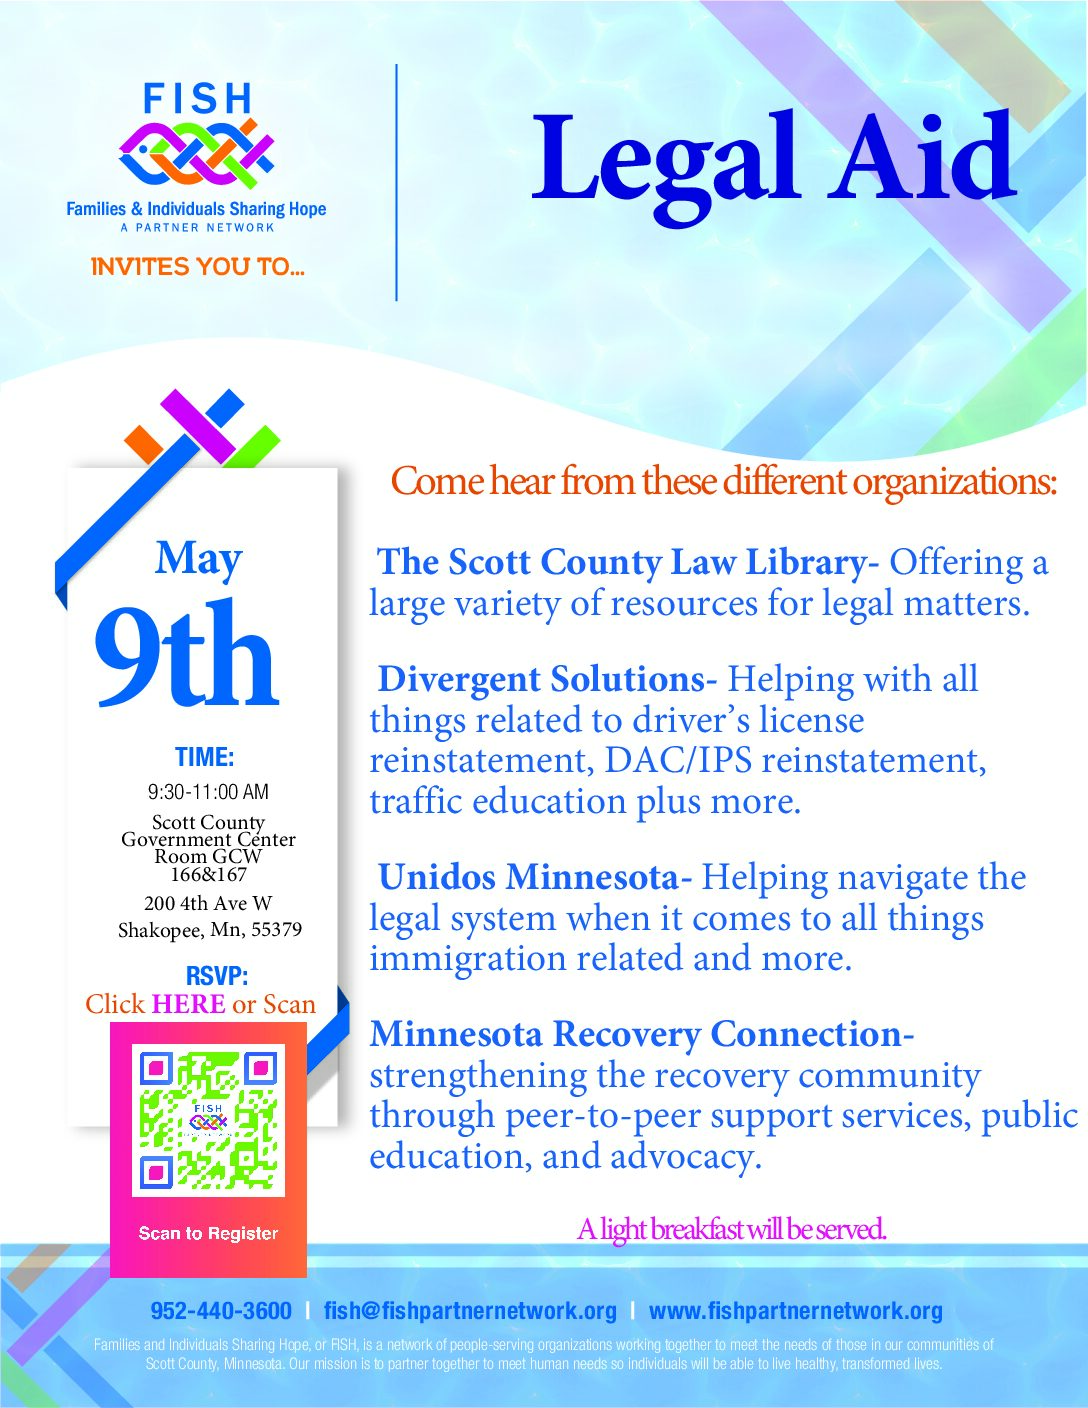 2nd Thursday Meeting on May 9th: Legal Aid